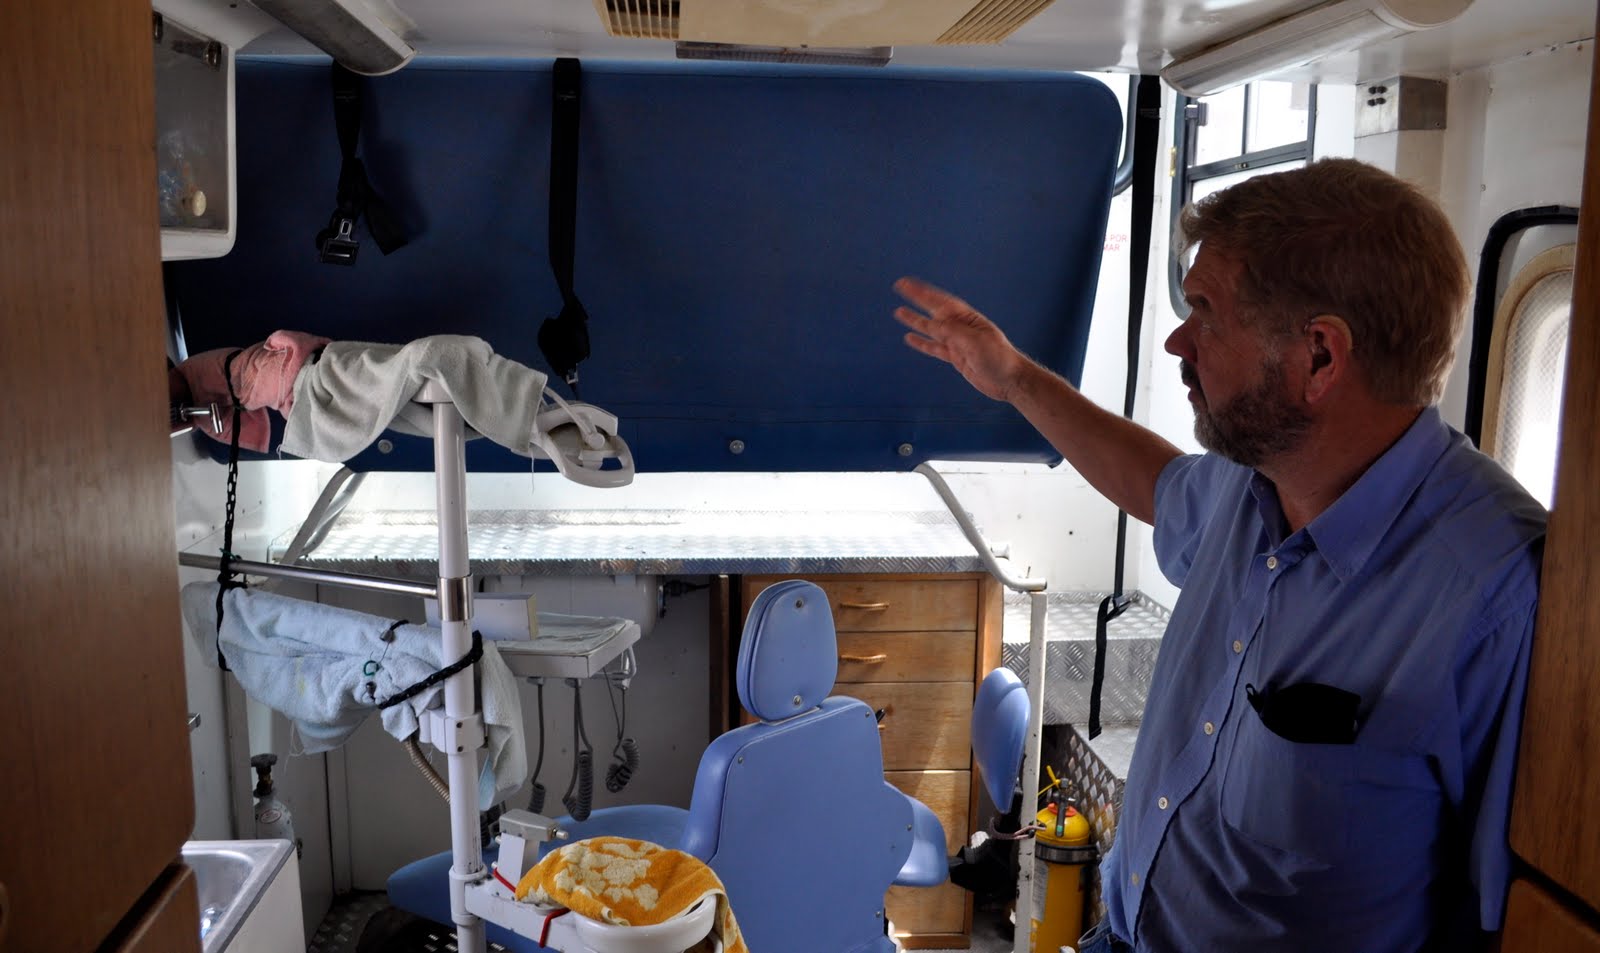 Man standing inside a trailer with dental chair and equipment, gesturing toward the equipment